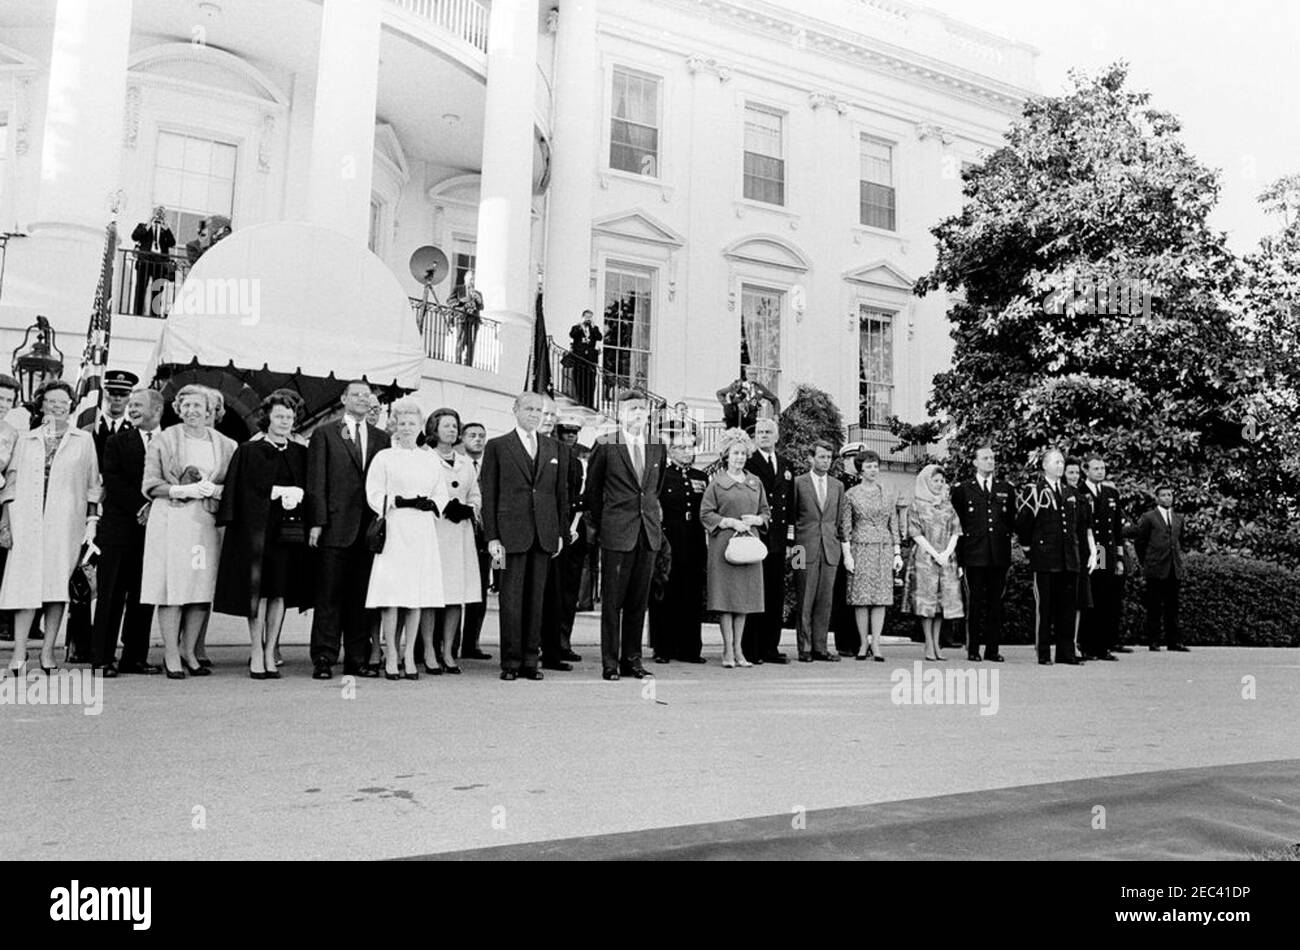 President Kennedy greets recipients of the Congressional Medal of Honor, Annual Military Reception, 6:03PM. President John F. Kennedy and others attend a military reception in honor of recipients of the Congressional Medal of Honor. Left to right: several unidentified persons; Margaret McNamara (wearing black coat), wife of Robert S. McNamara, Secretary of Defense; Secretary McNamara; Secretary of the Navy, Fred Korth (behind McNamara); Madelin T. Gilpatric, wife of Roswell L. Gilpatric, Deputy Secretary of Defense; Phyllis Chess Ellsworth, wife of C. Douglas Dillon, Secretary of the Treasury; Stock Photo